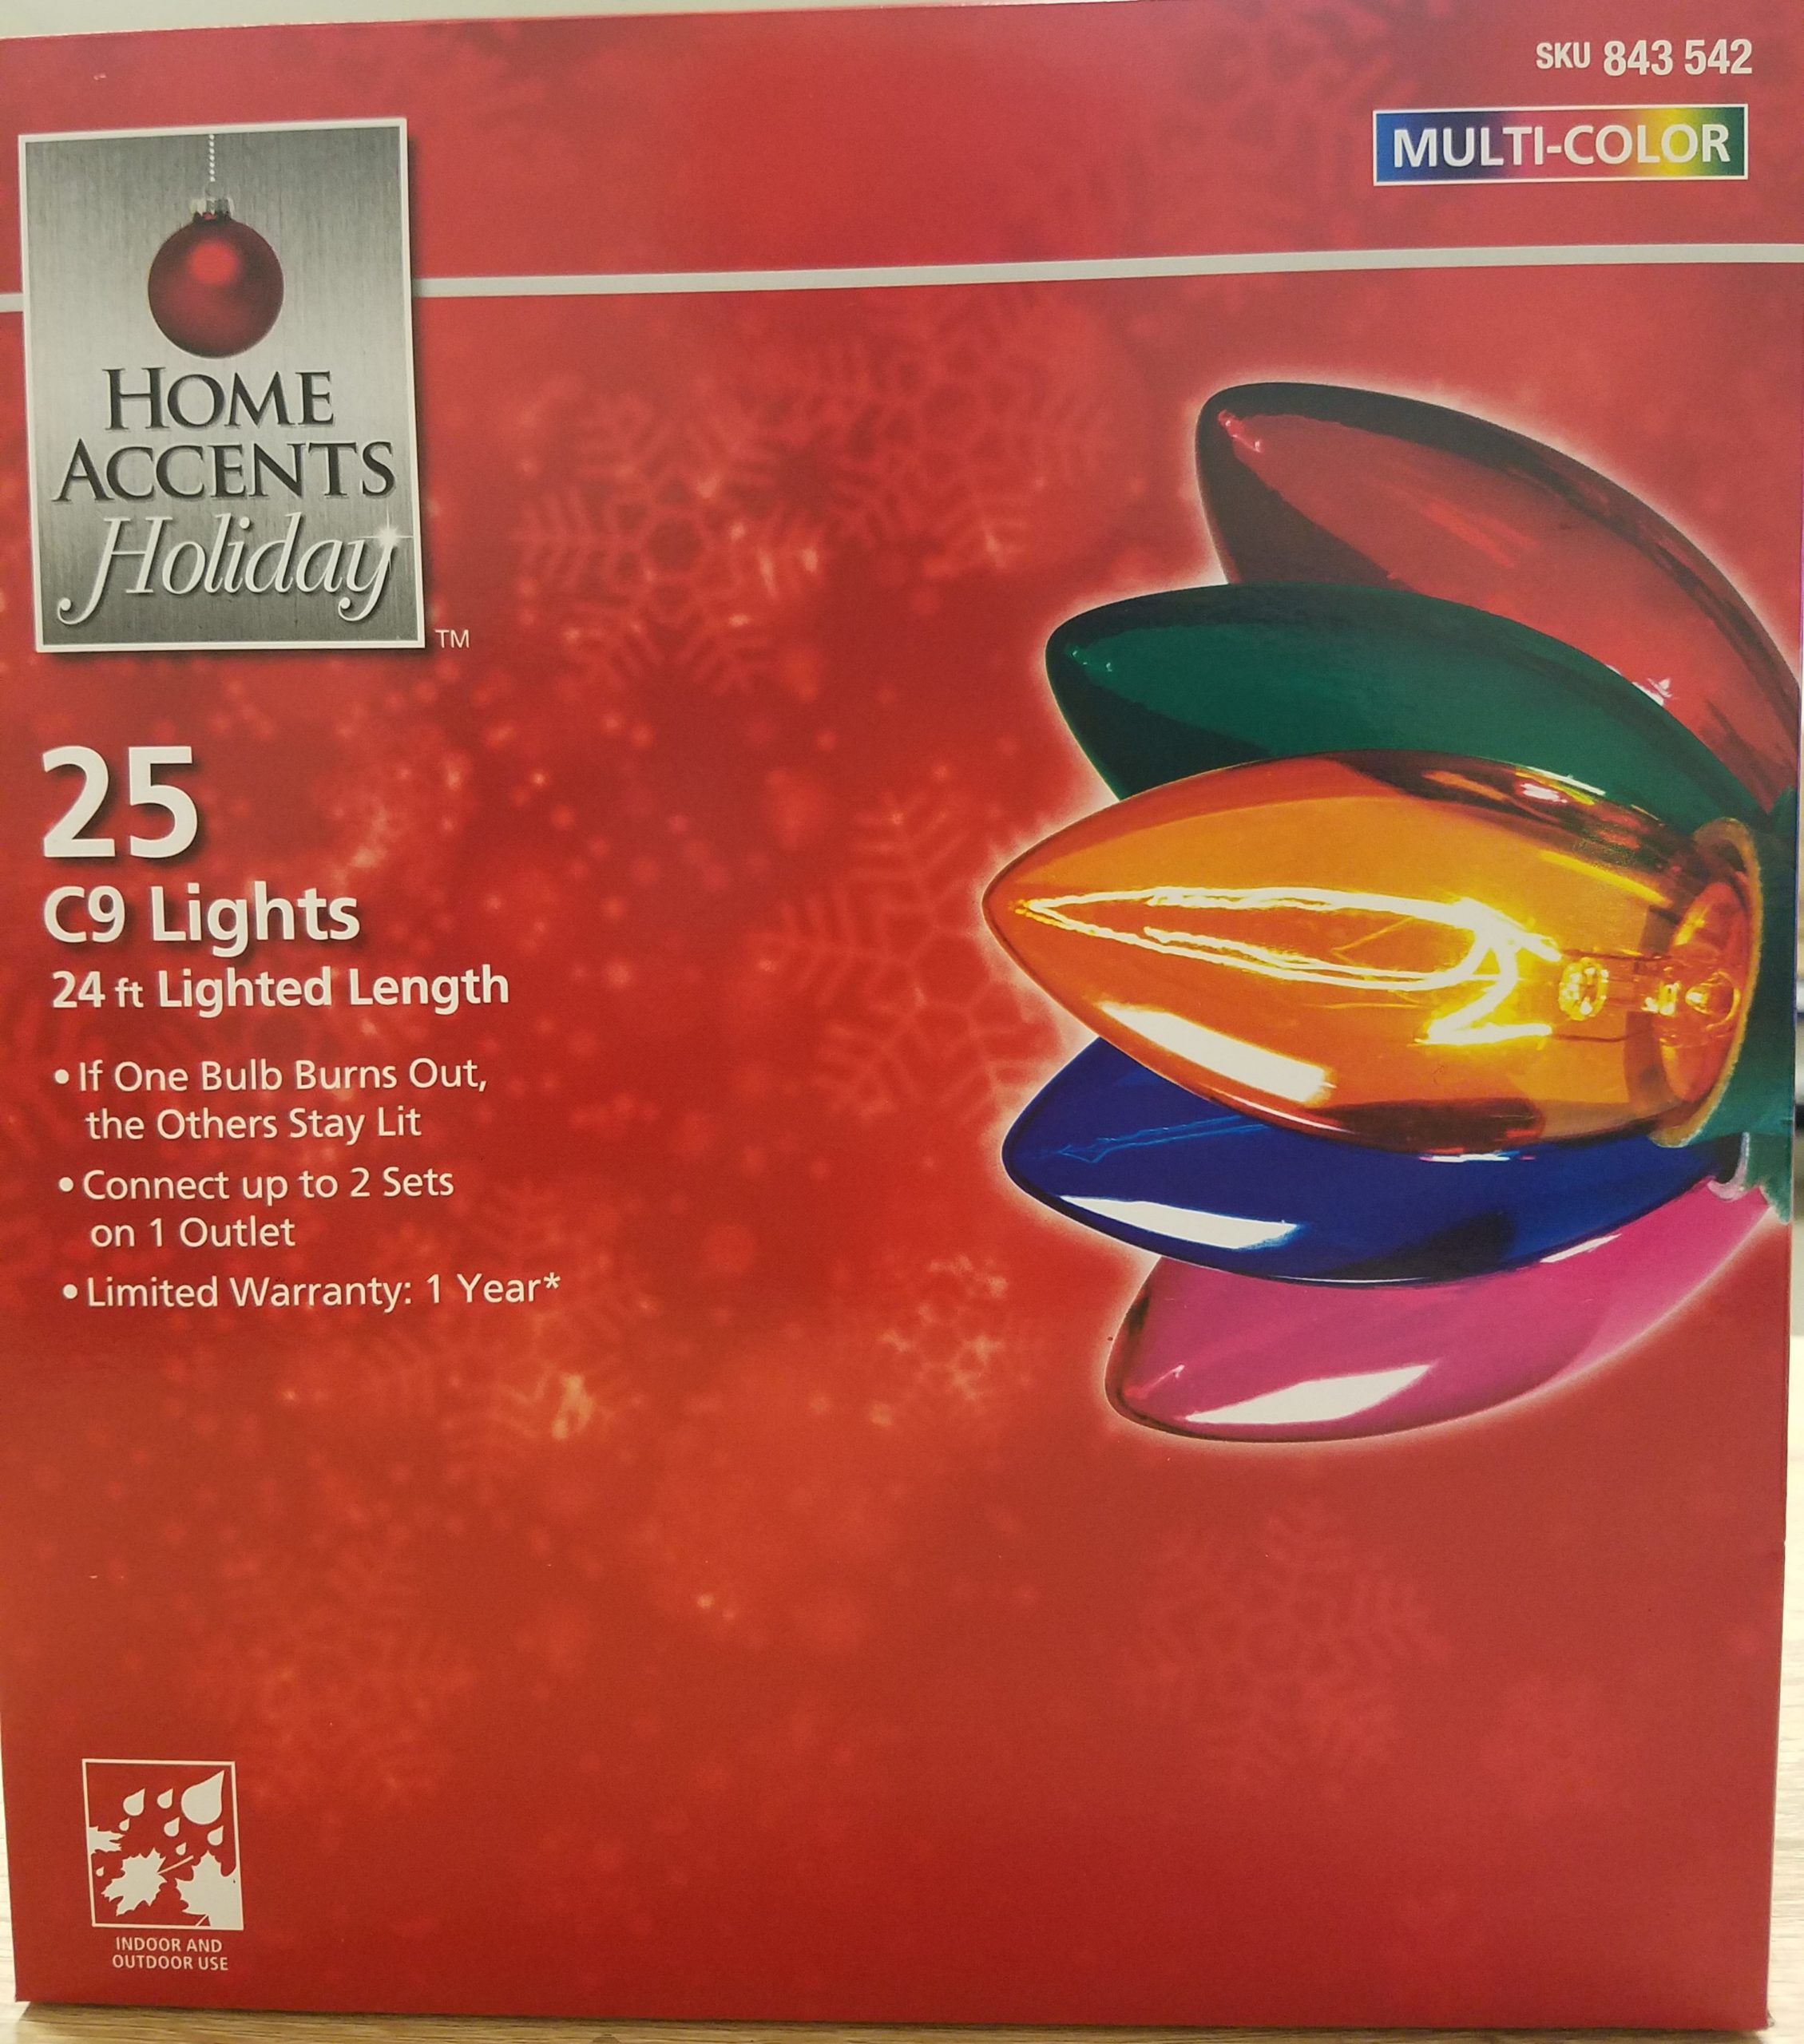 Home Accents Holiday C9 25-Light Multi-Color Light Set